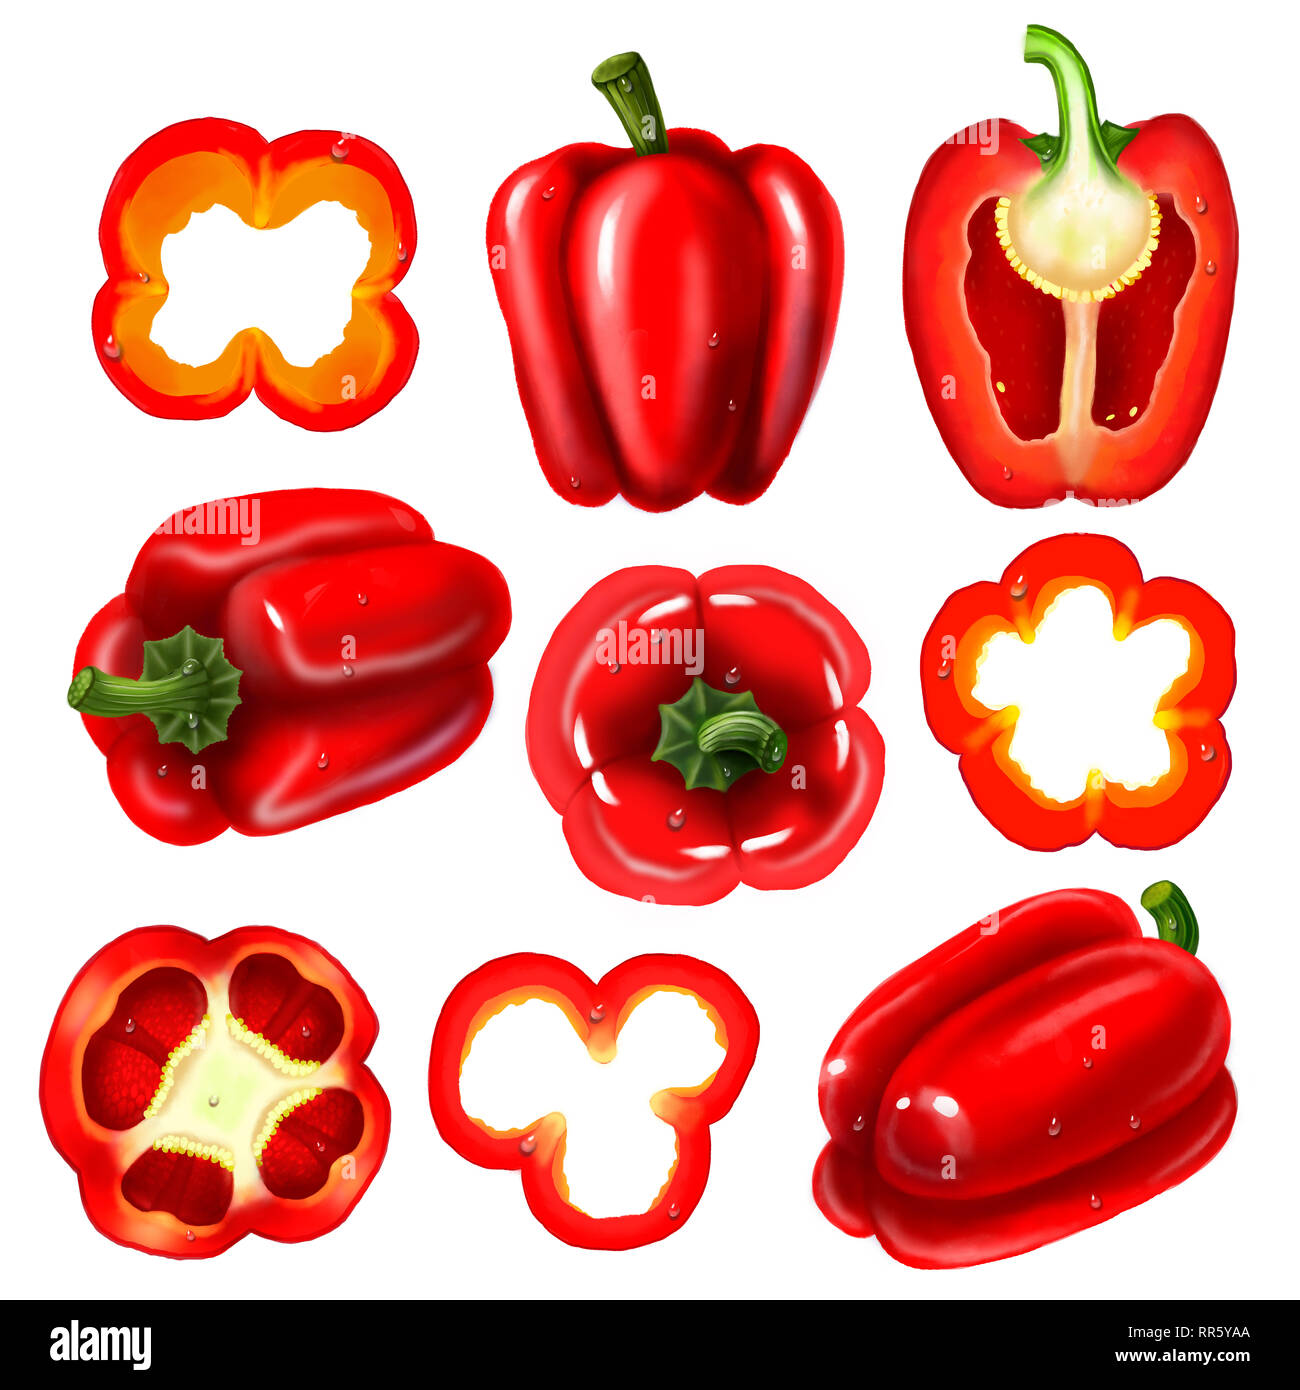 Large set. Illustration of a red bell pepper. Stock Photo